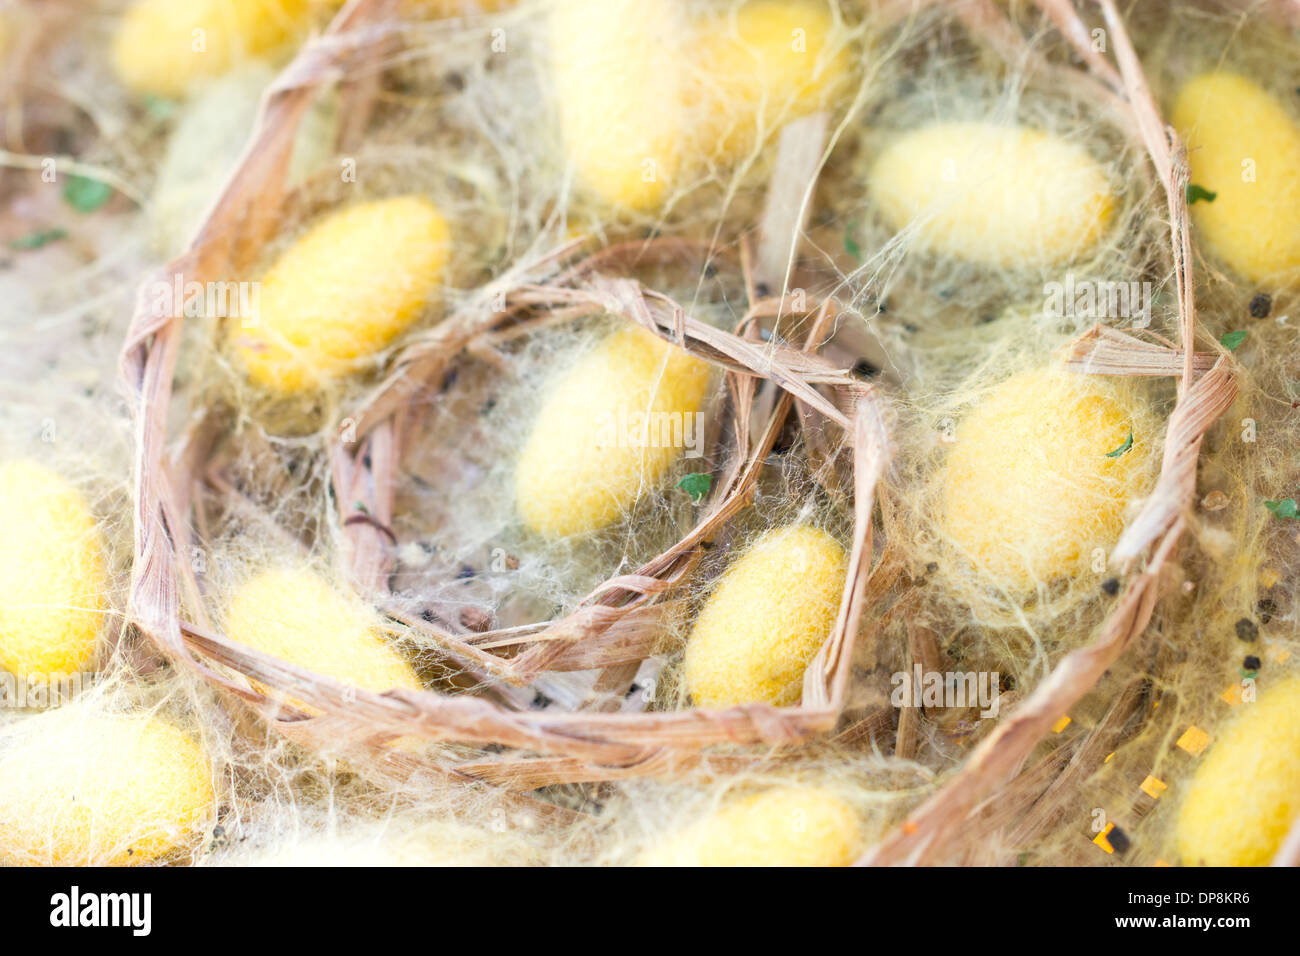 Close up of silkworms nest in bamboo basket. Stock Photo